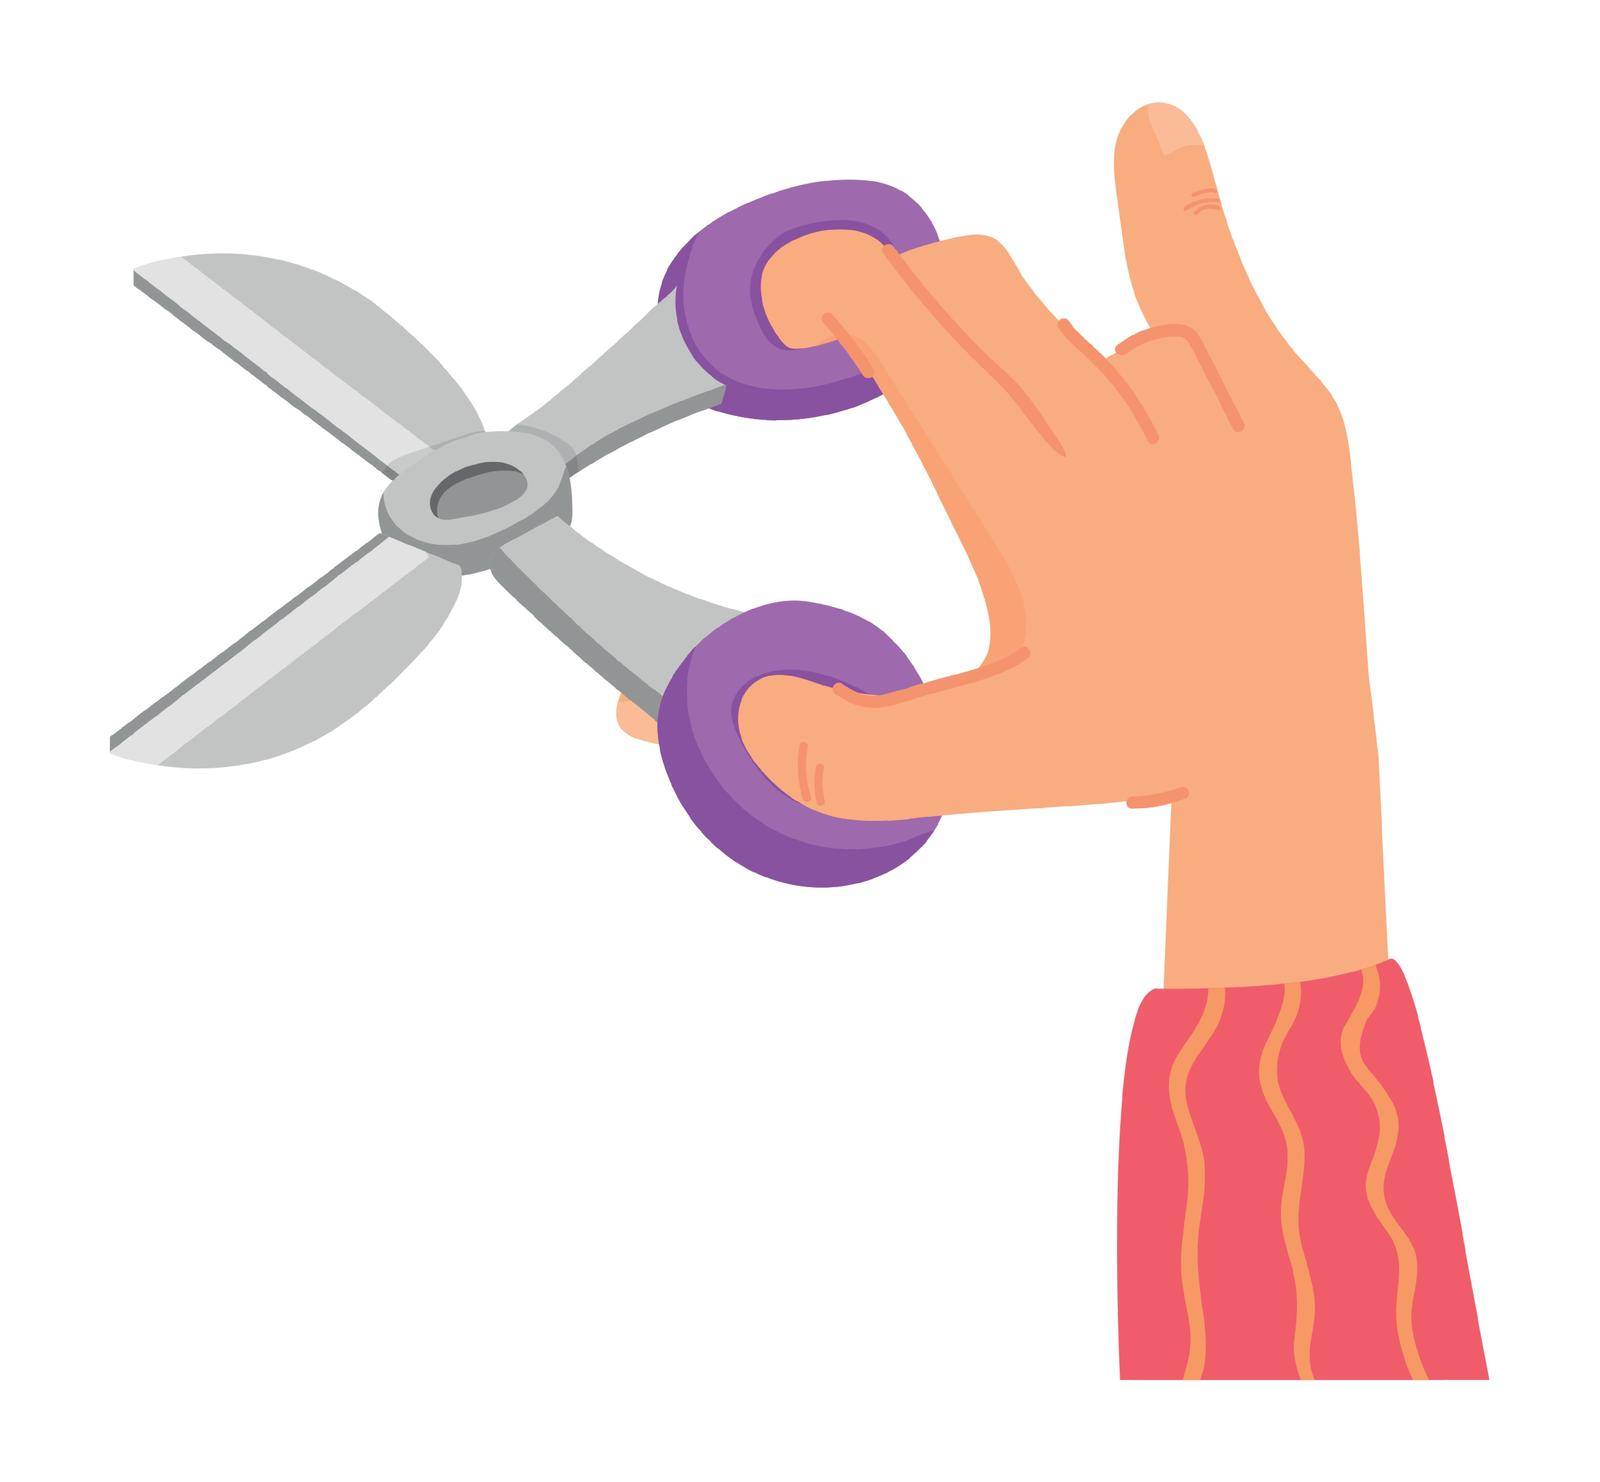 Hand holding open scissors. Cutting icon in cartoon style. Vector illustration